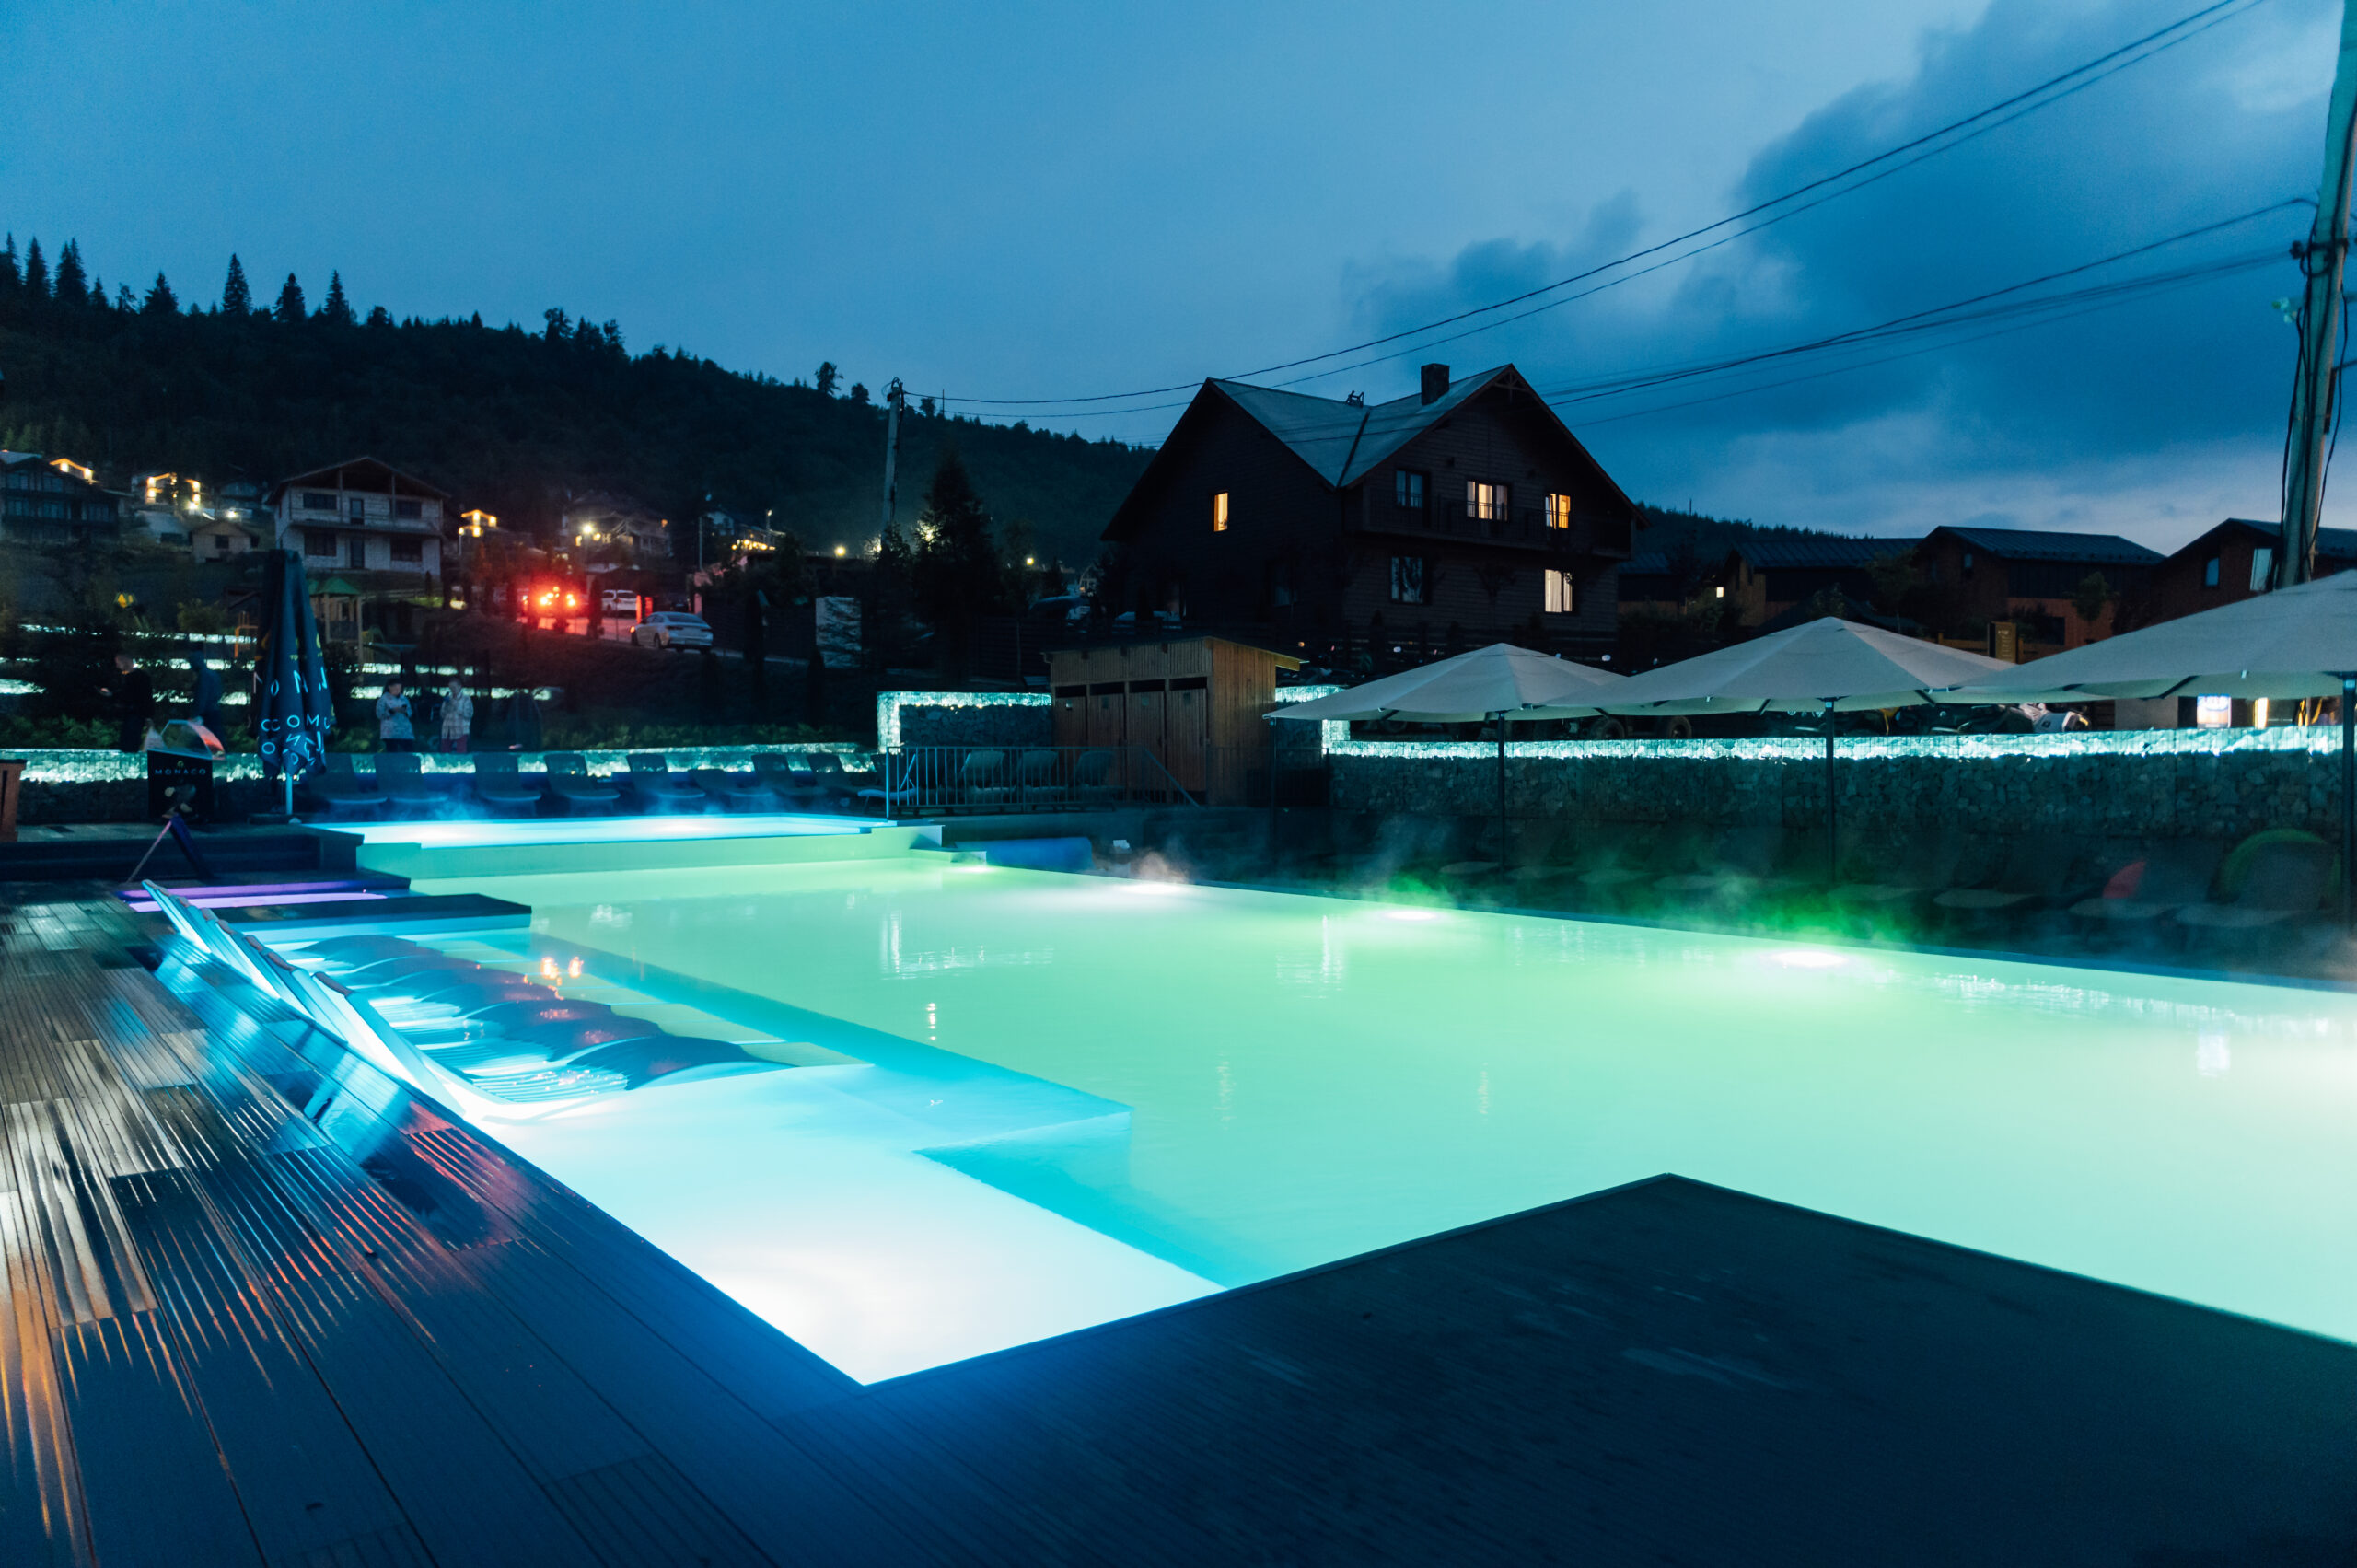 Outdoor pool lighting, creating a warm and inviting atmosphere for nighttime relaxation and enjoyment.